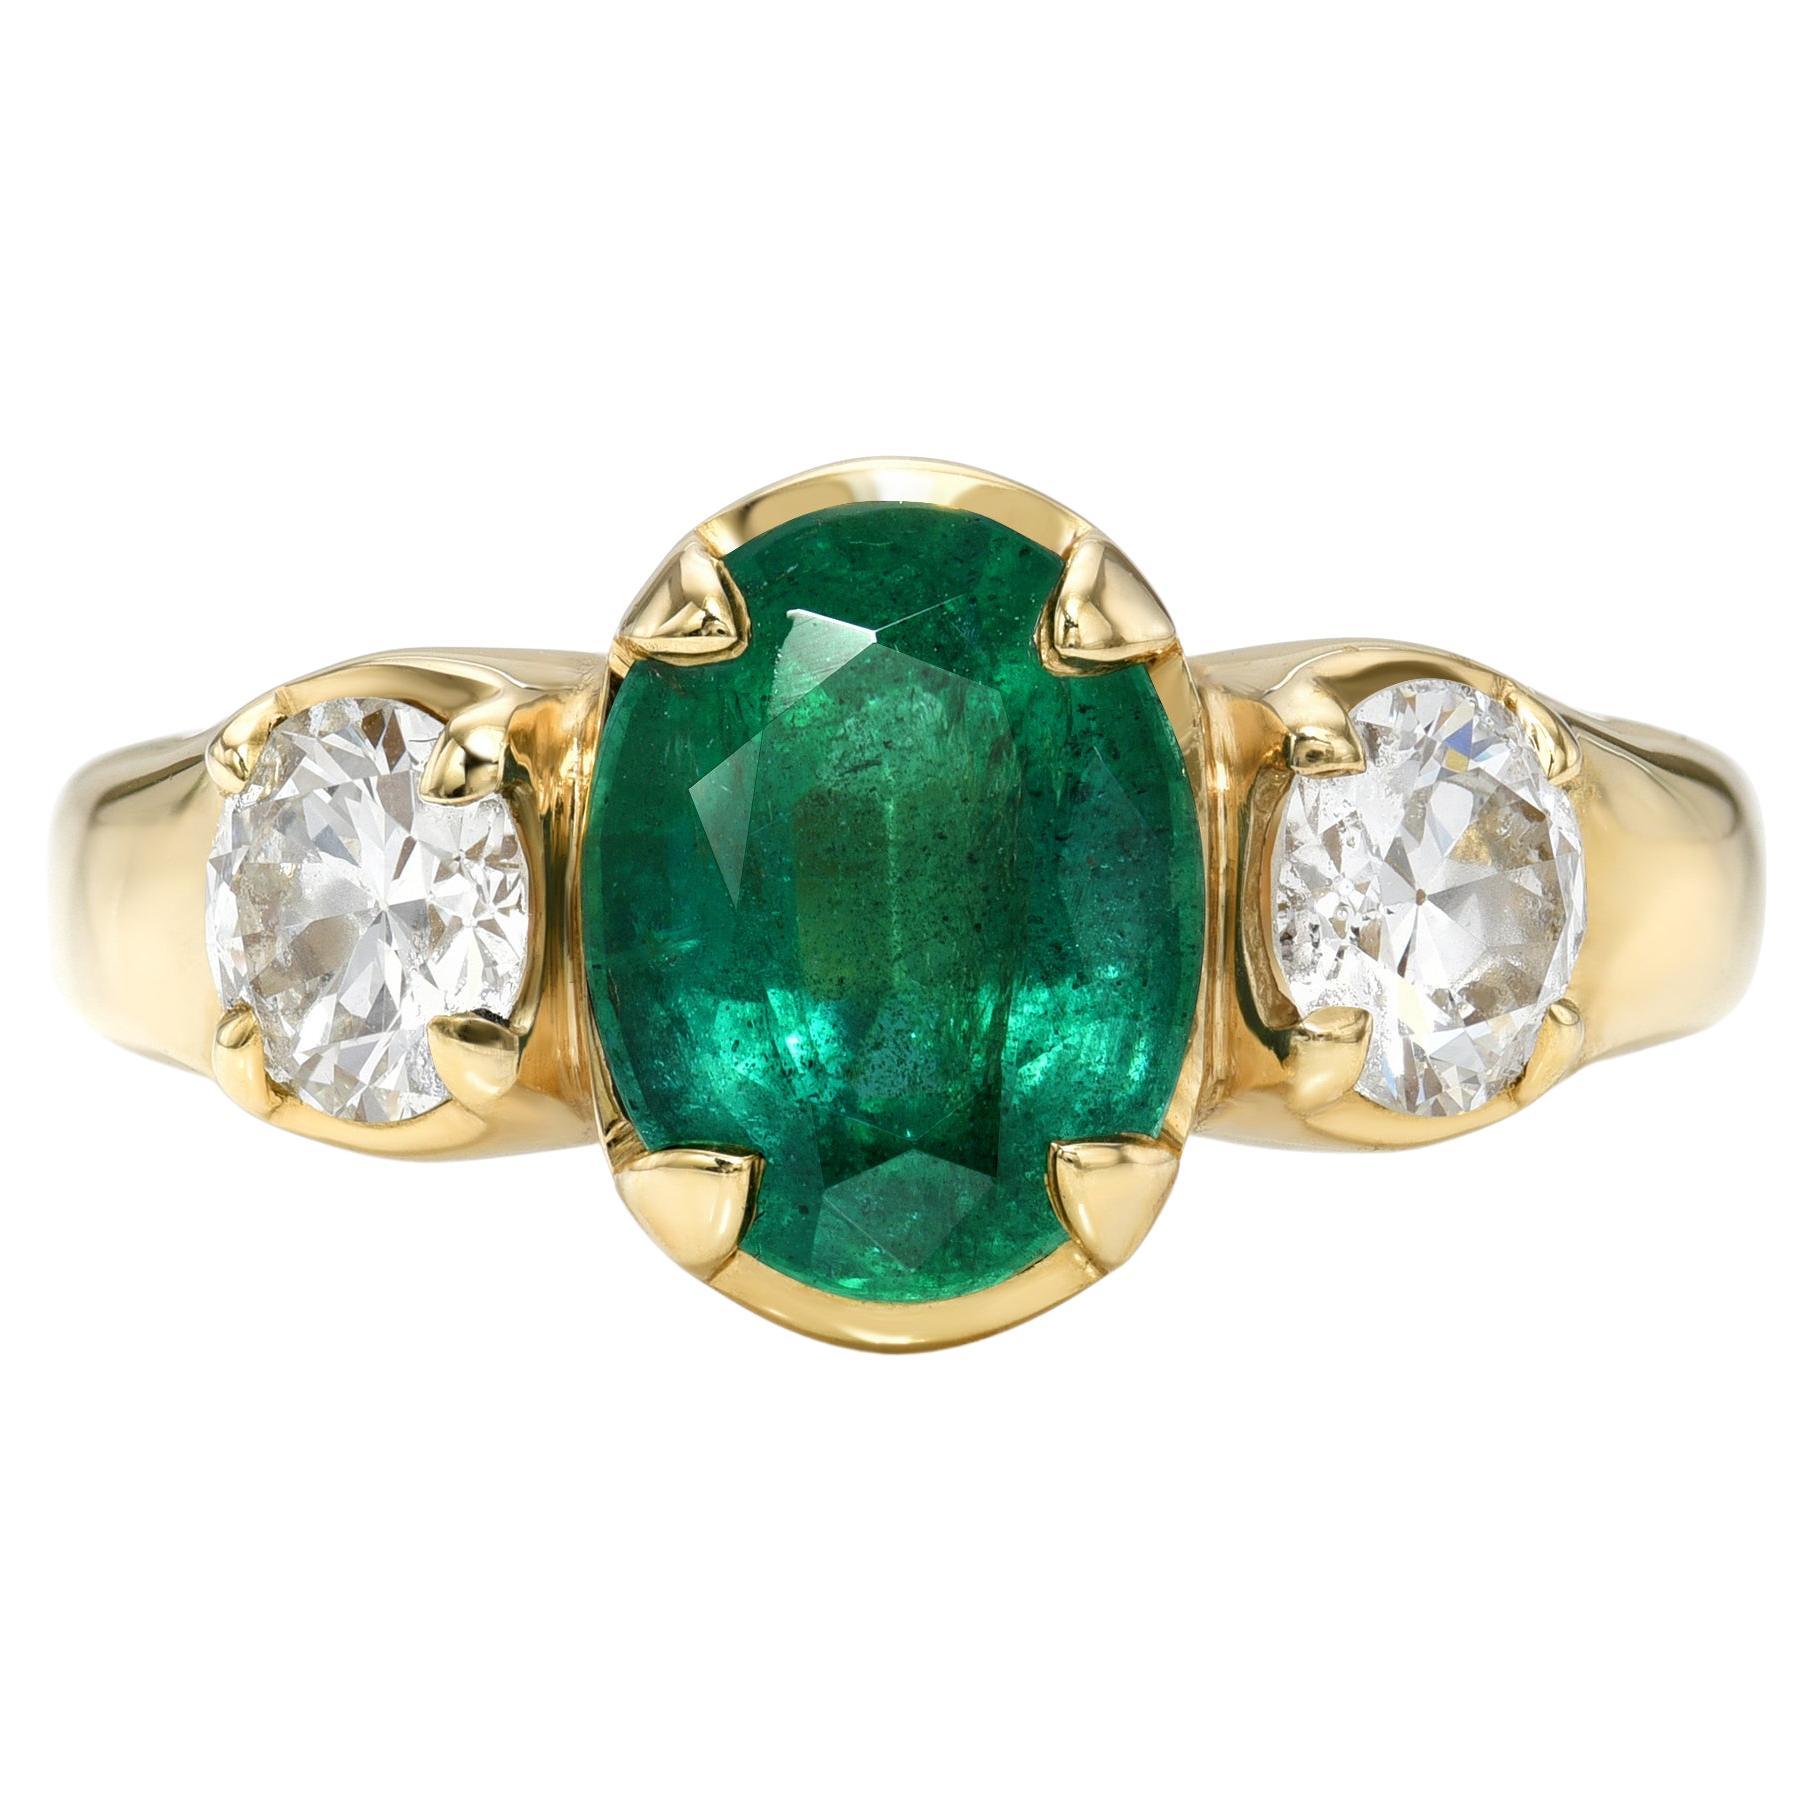 Handcrafted Brooklyn Cushion Cut Emerald Ring by Single Stone For Sale